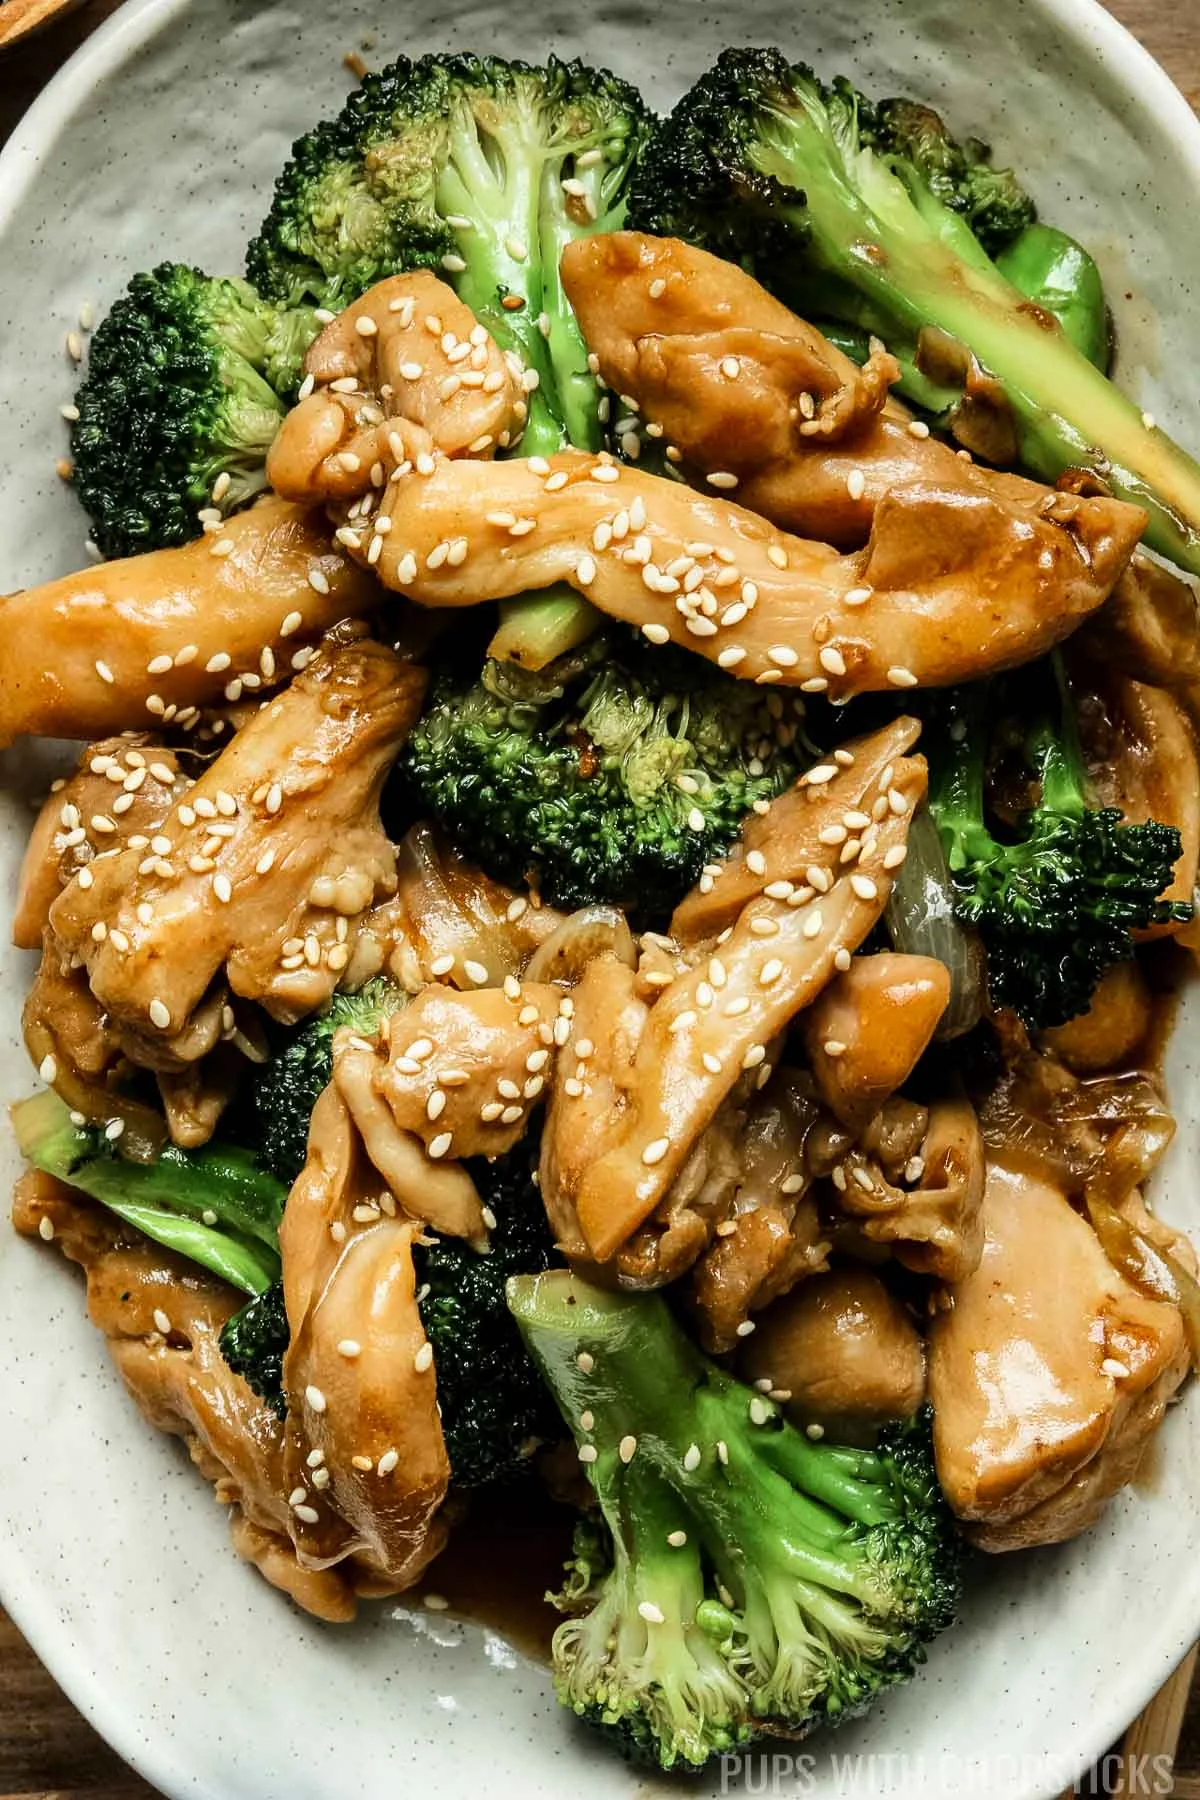 chicken and broccoli stir fry on a white plate on a wooden table.